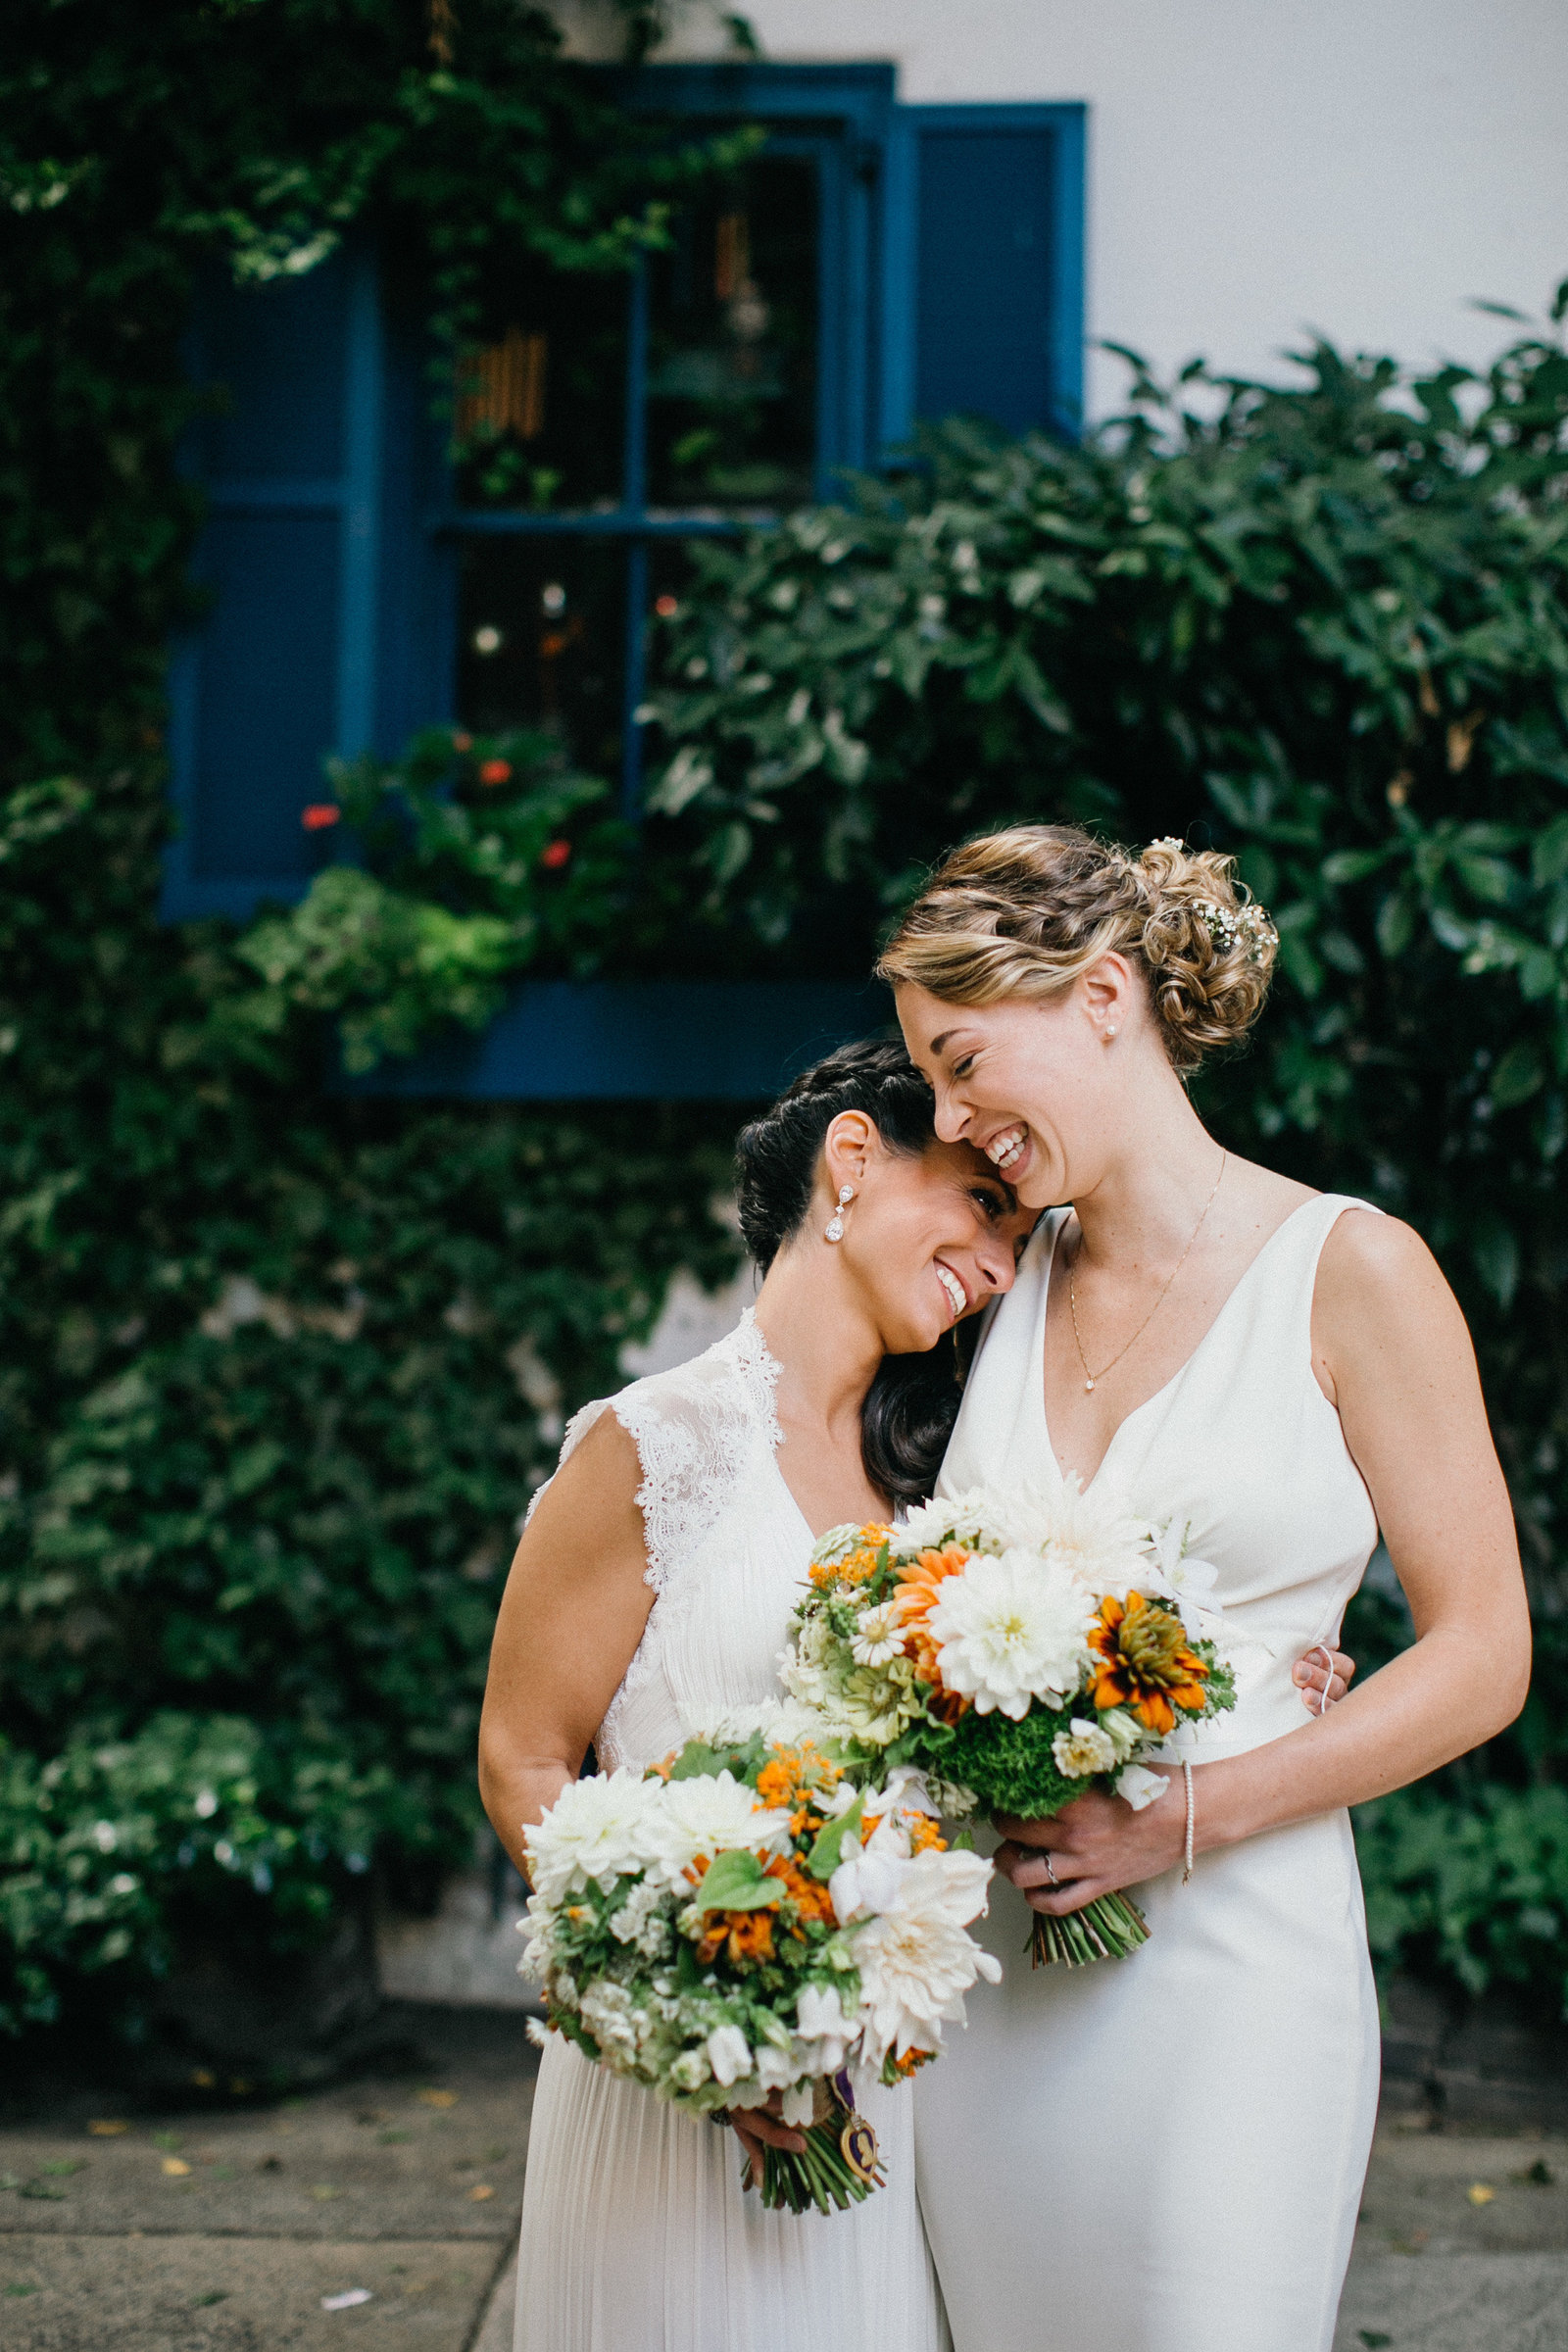 These brides were all smiles on their wedding day in Philadelphia, photographed by Sweetwater.